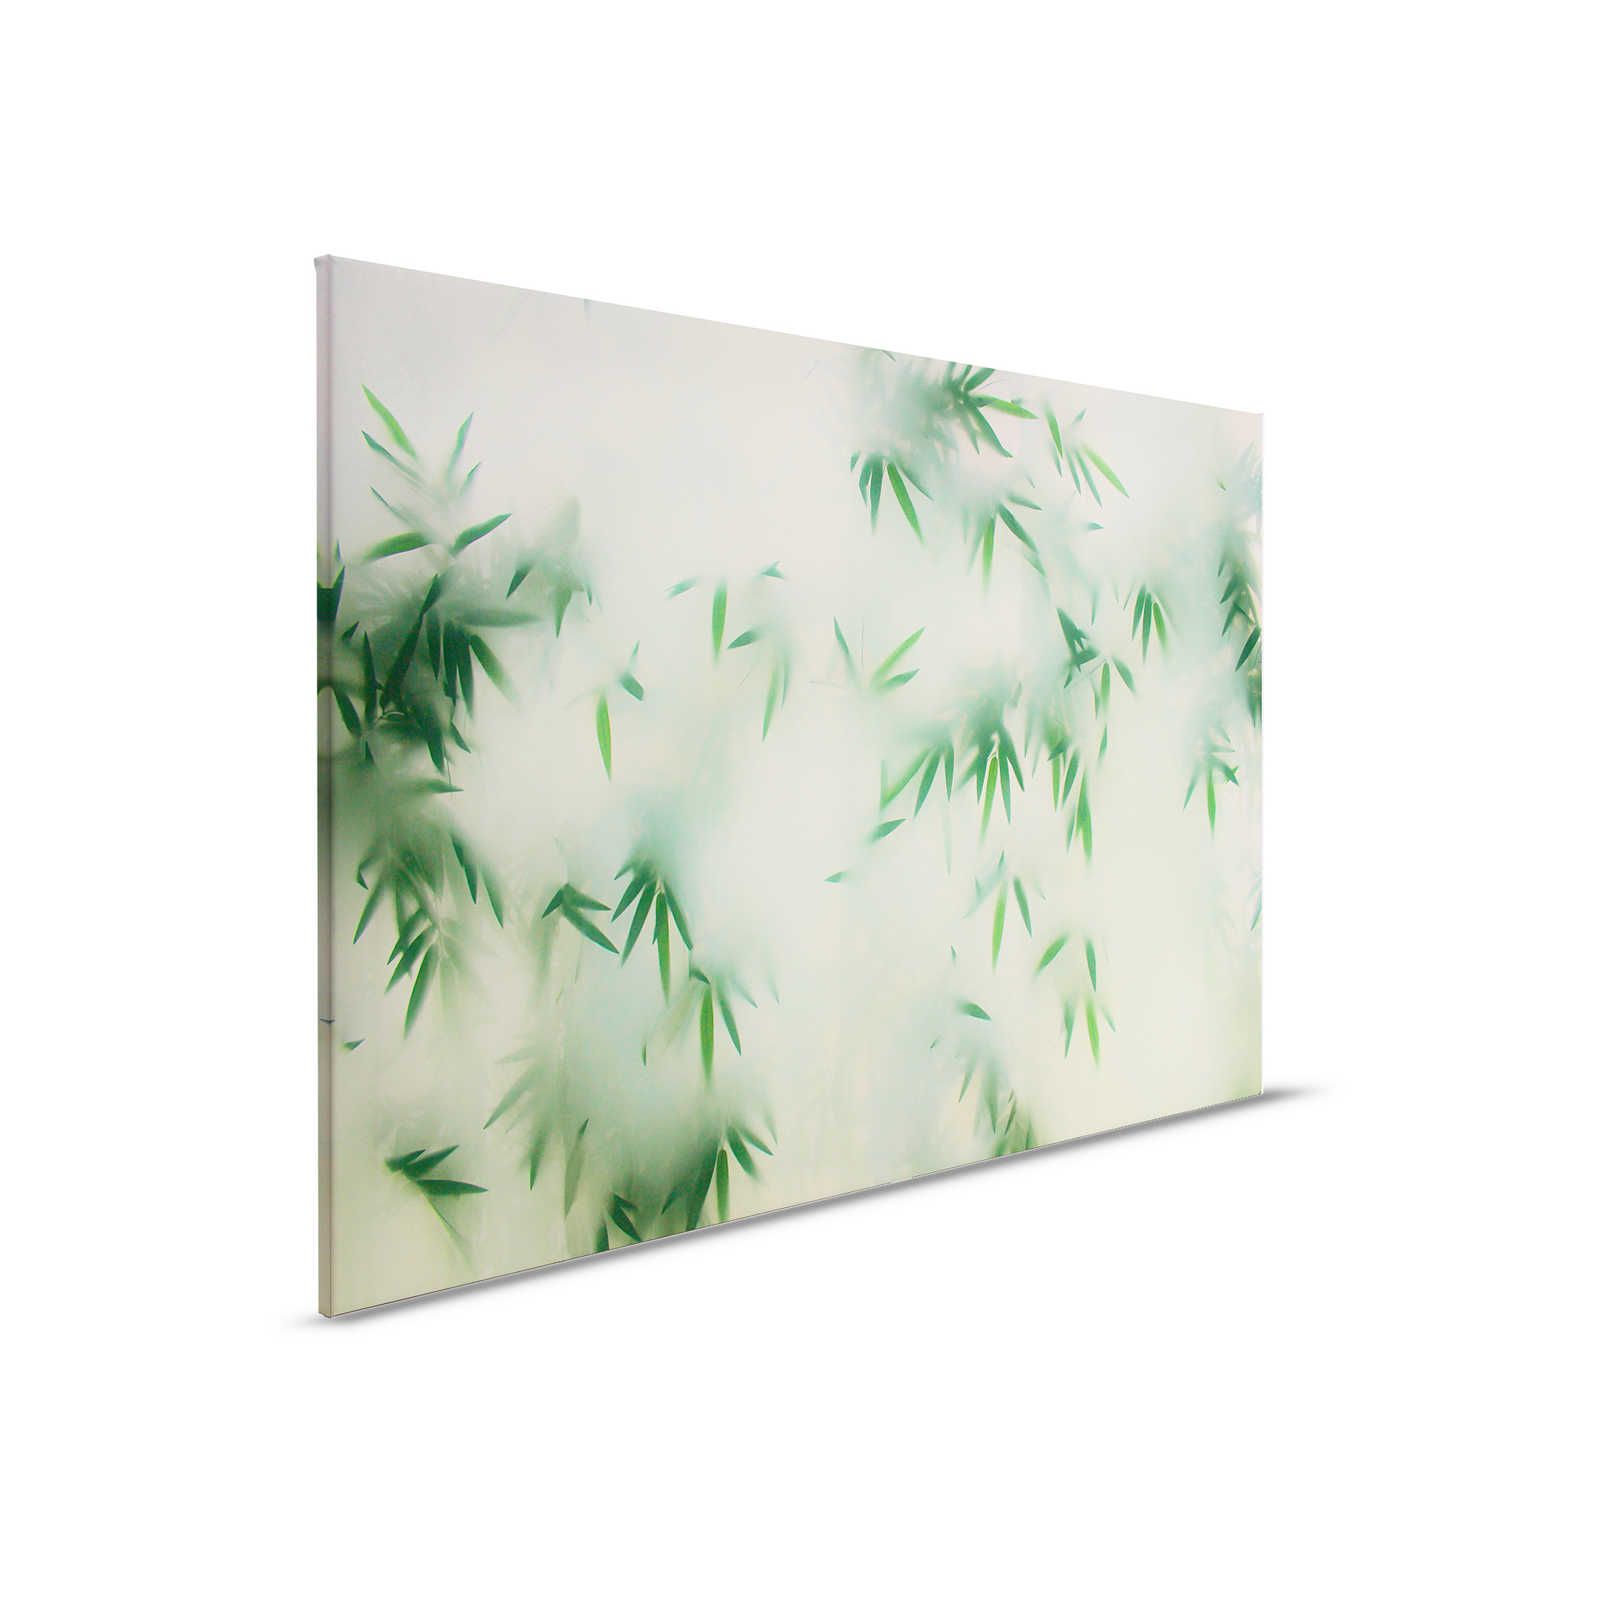         Panda Paradise 2 - Canvas painting green bamboo in the mist - 0,90 m x 0,60 m
    